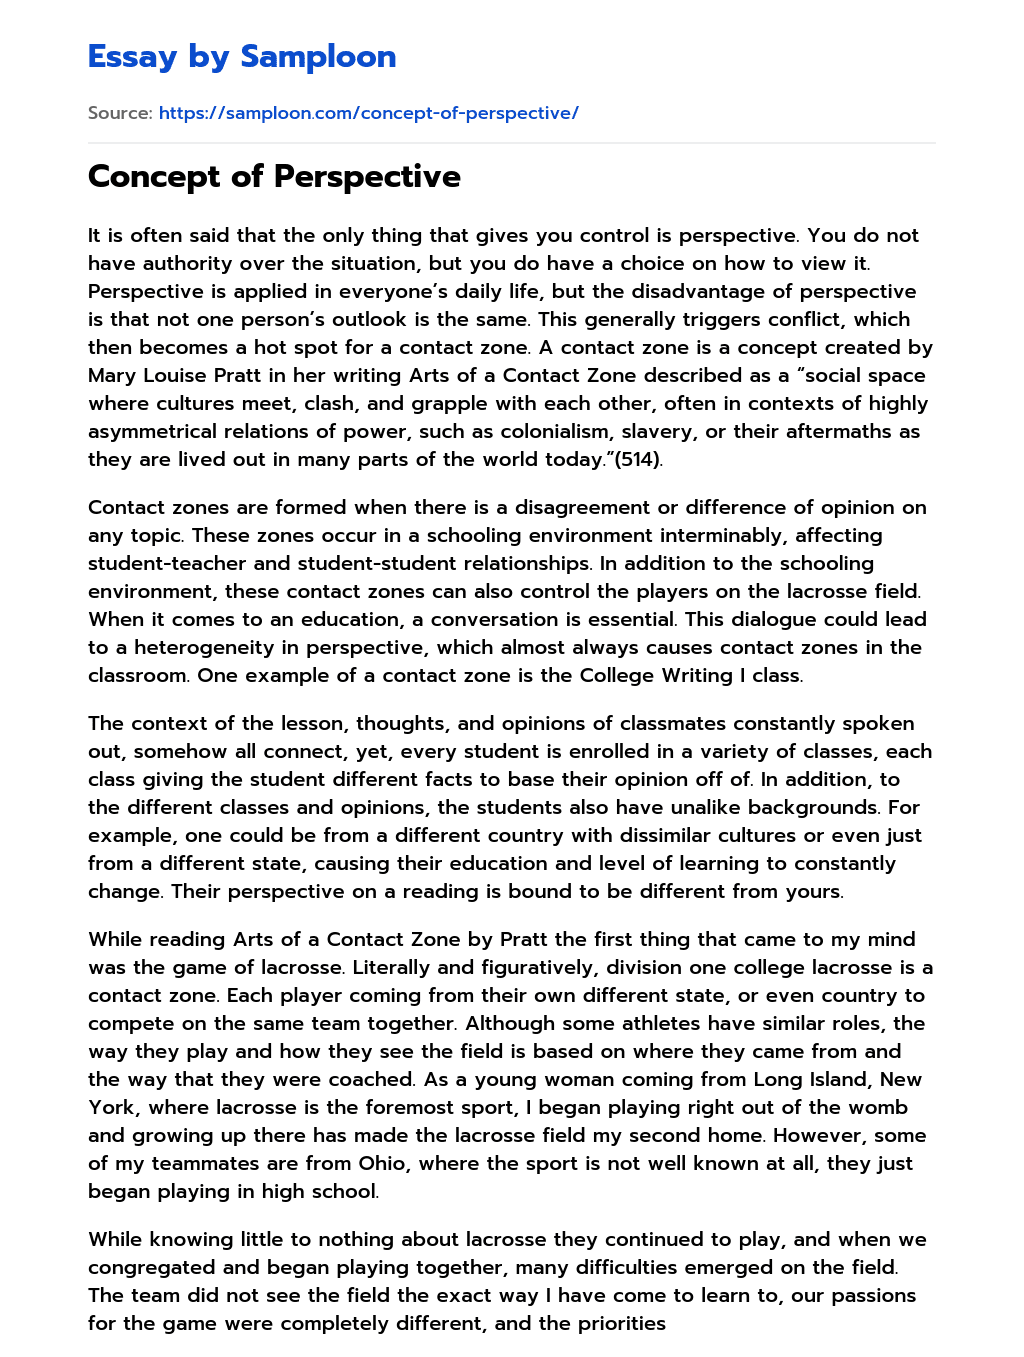 essay about perspective